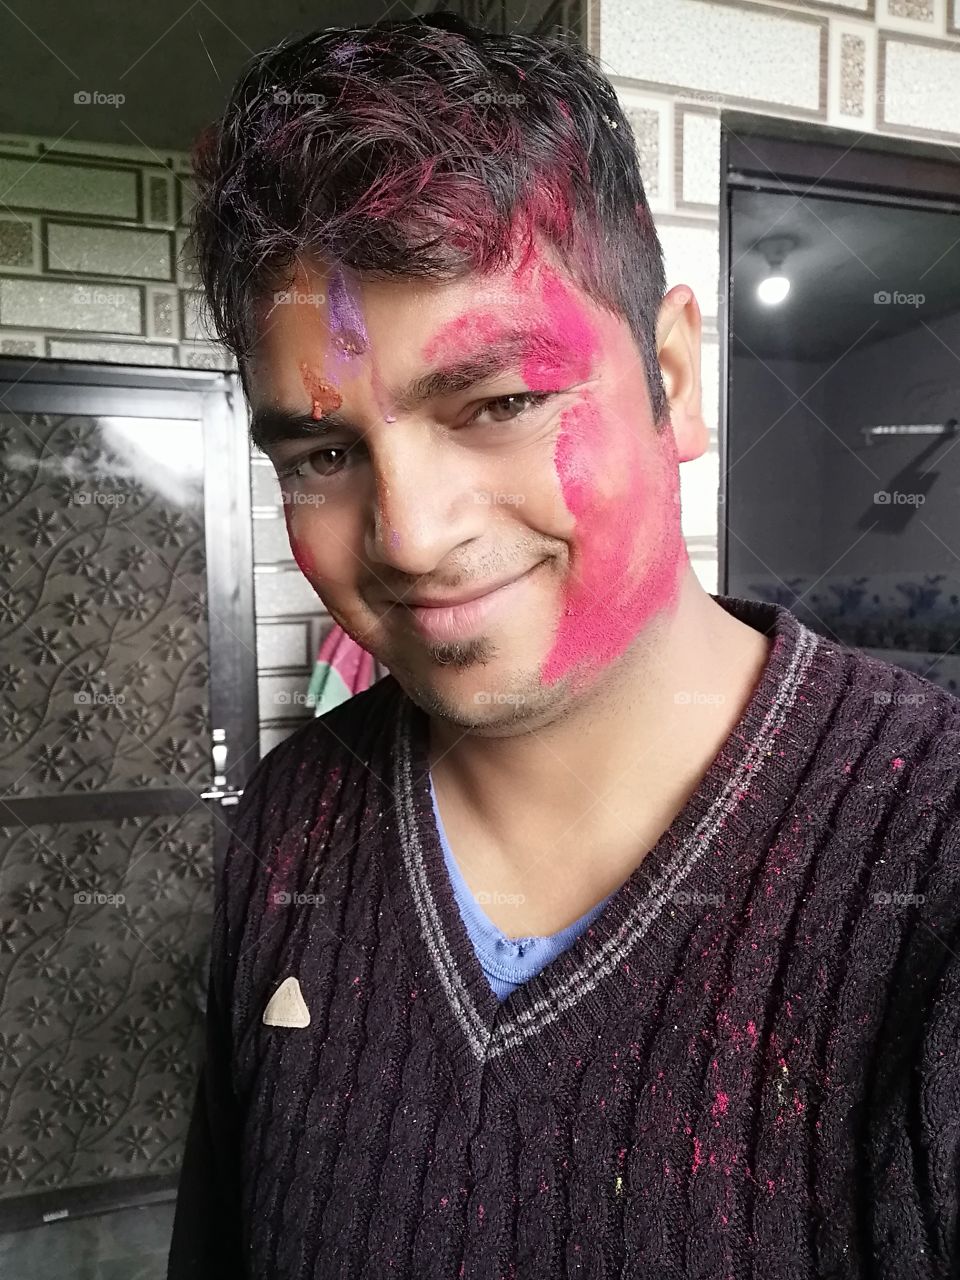 Smiling face on eve of Celebrate traditional Indian festival Holi or the festival of colors.